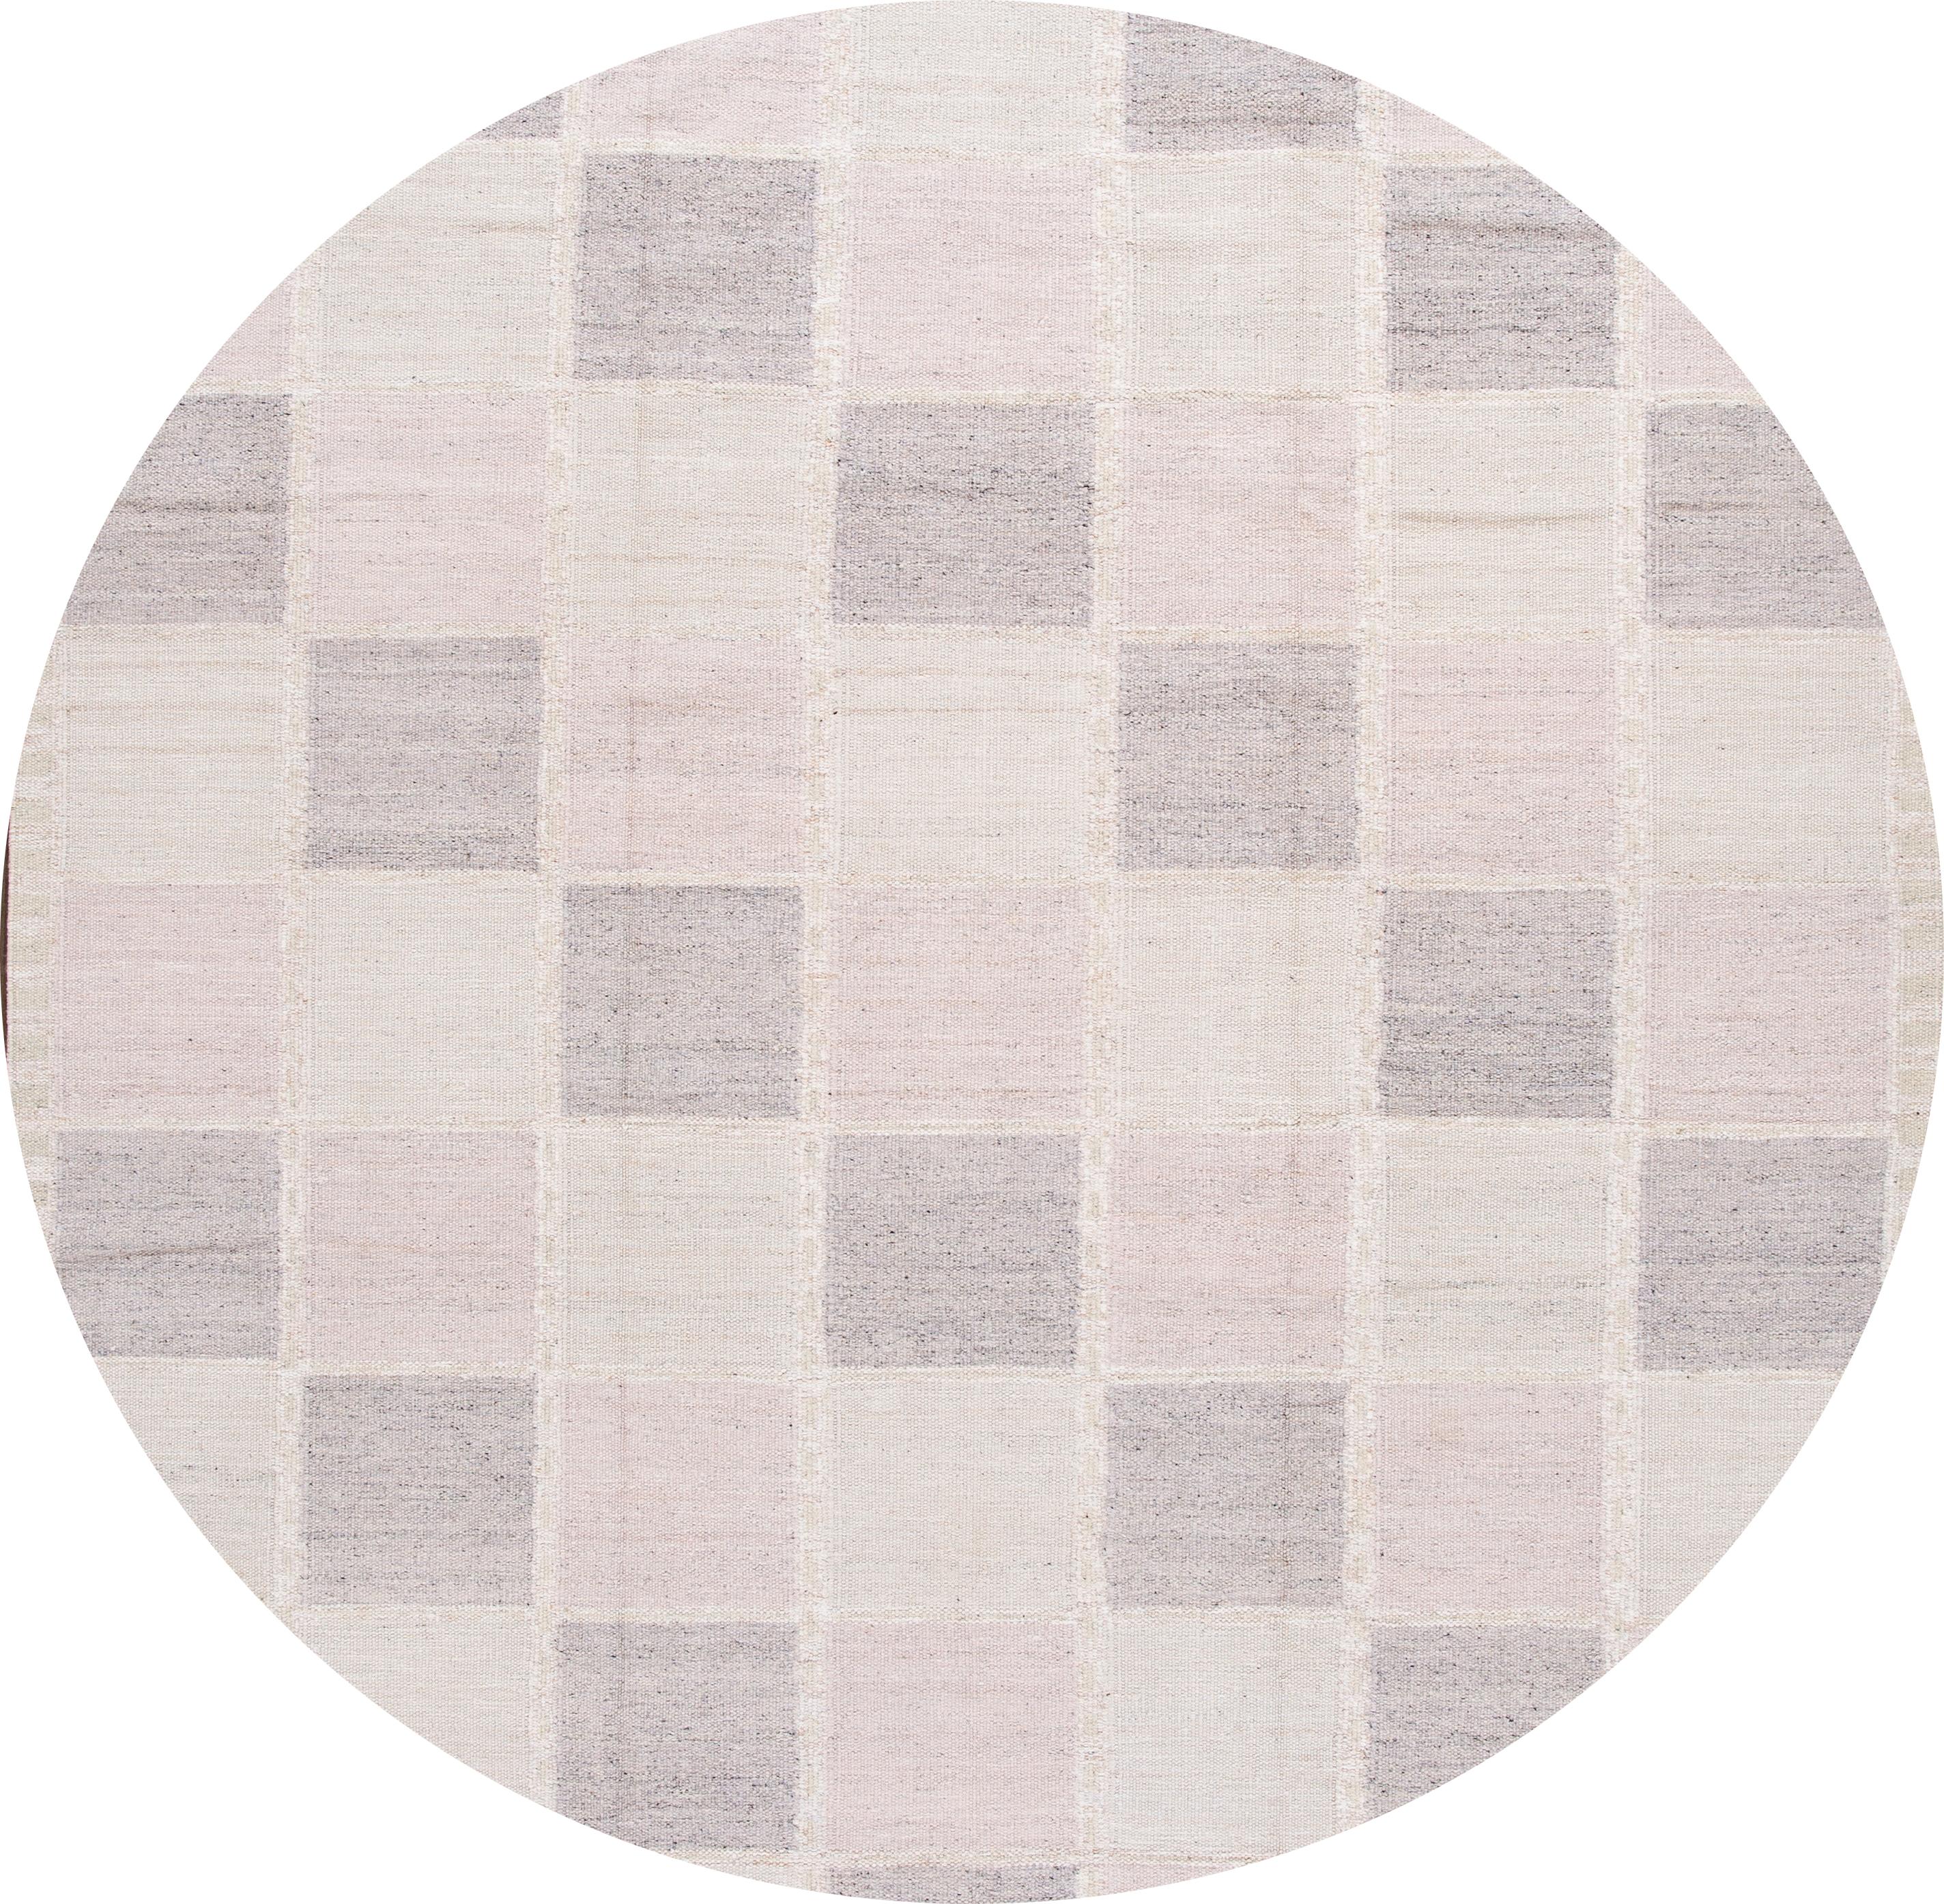 Beautiful 21st century modern Swedish hand knotted wool rug with a beige field, pink, and gray accents in an all-over checks design

This rug measures: 9'1